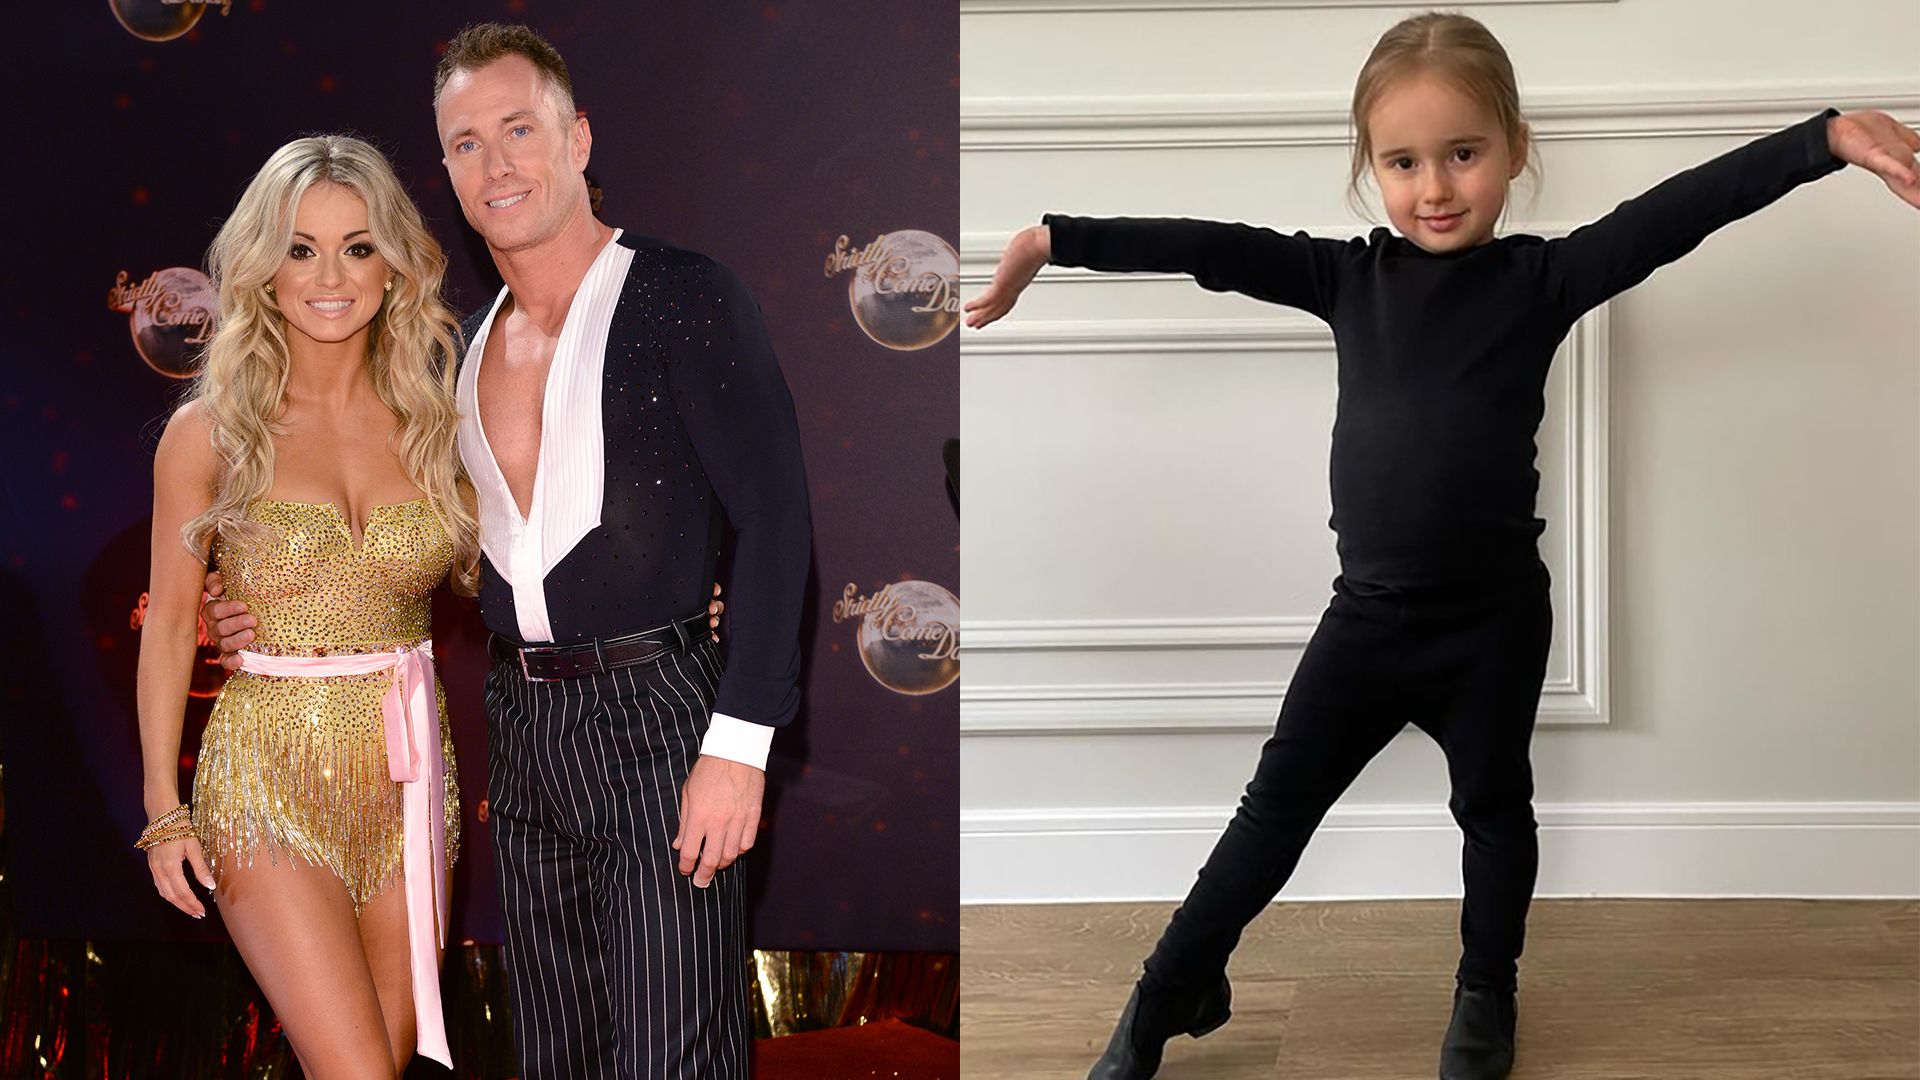 Exclusive video: James and Ola Jordan's excitement as daughter Ella, 4, follows in their Strictly footsteps